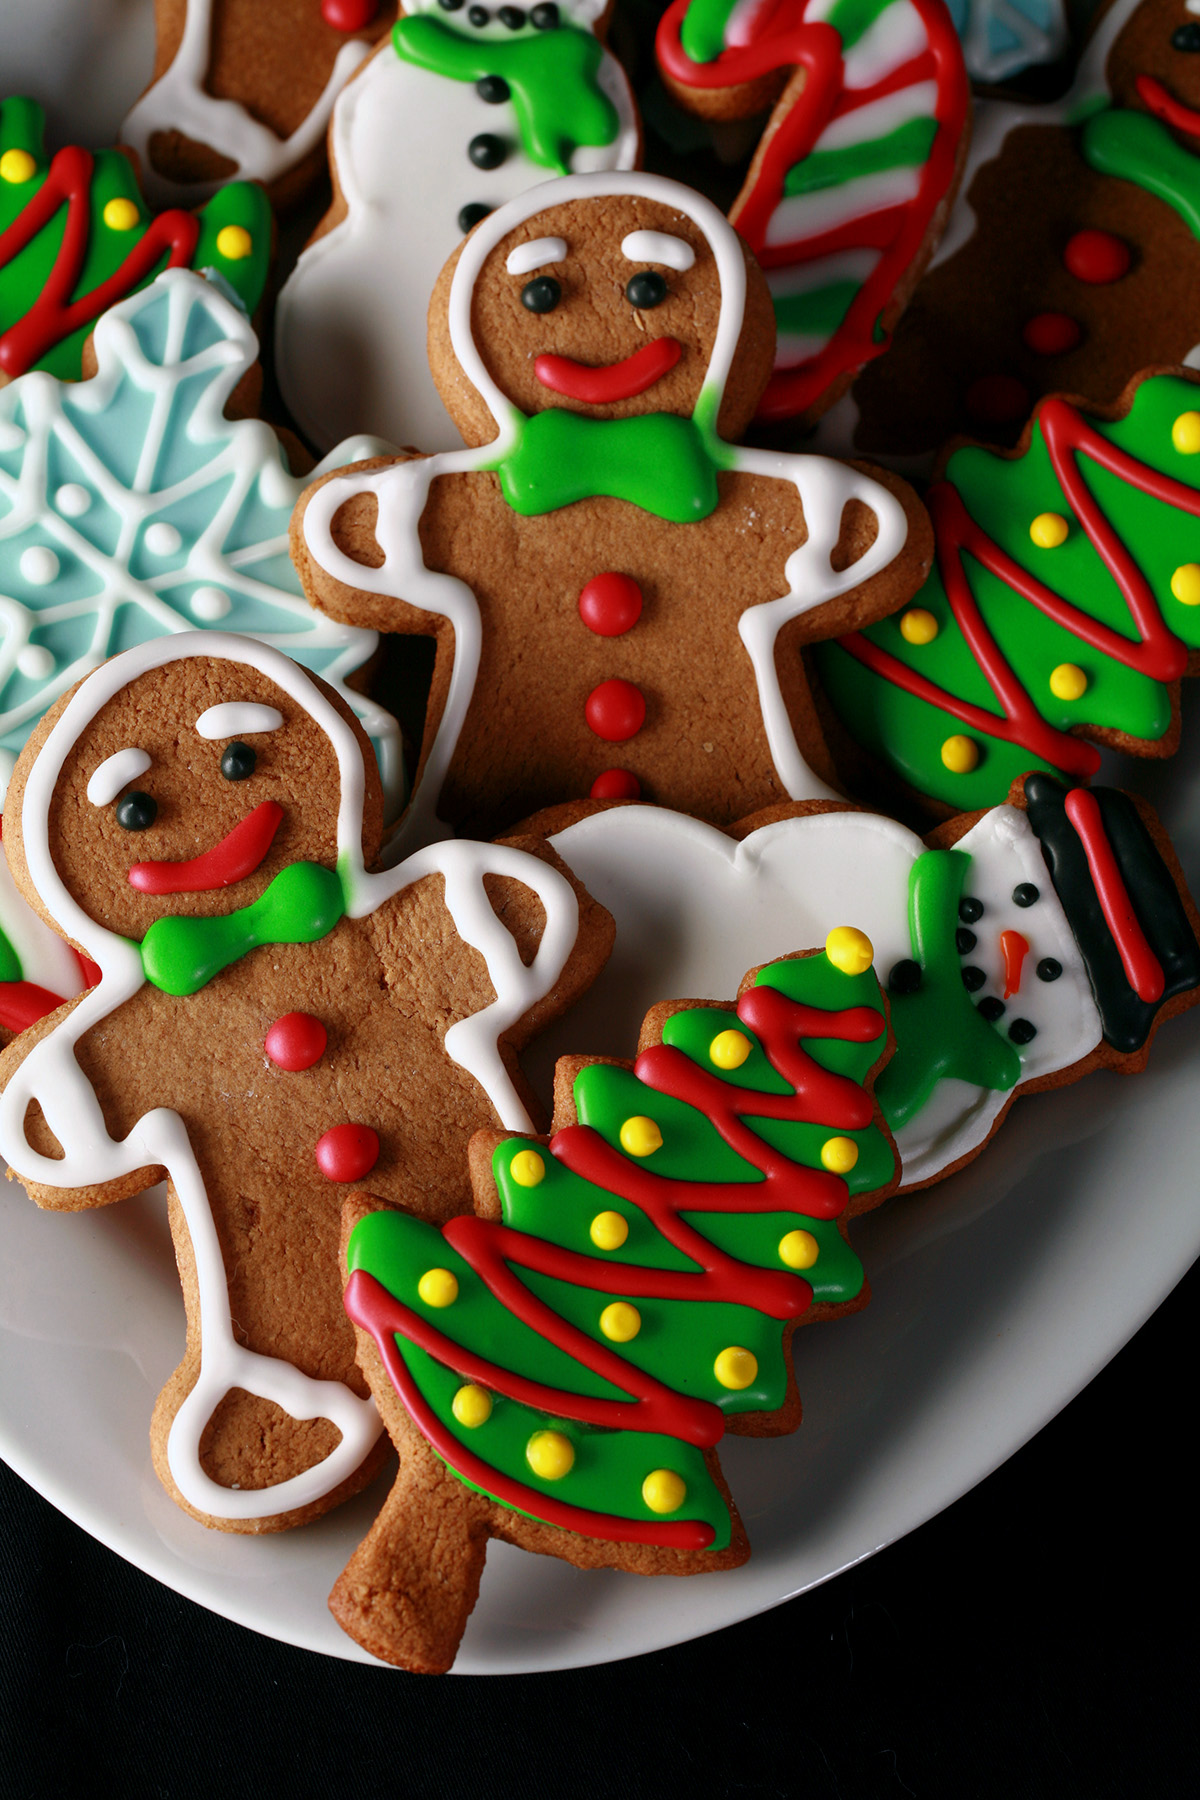 A plate of gluten-free gingerbread cookies, in various shapes, decorated with colourful royal icing.